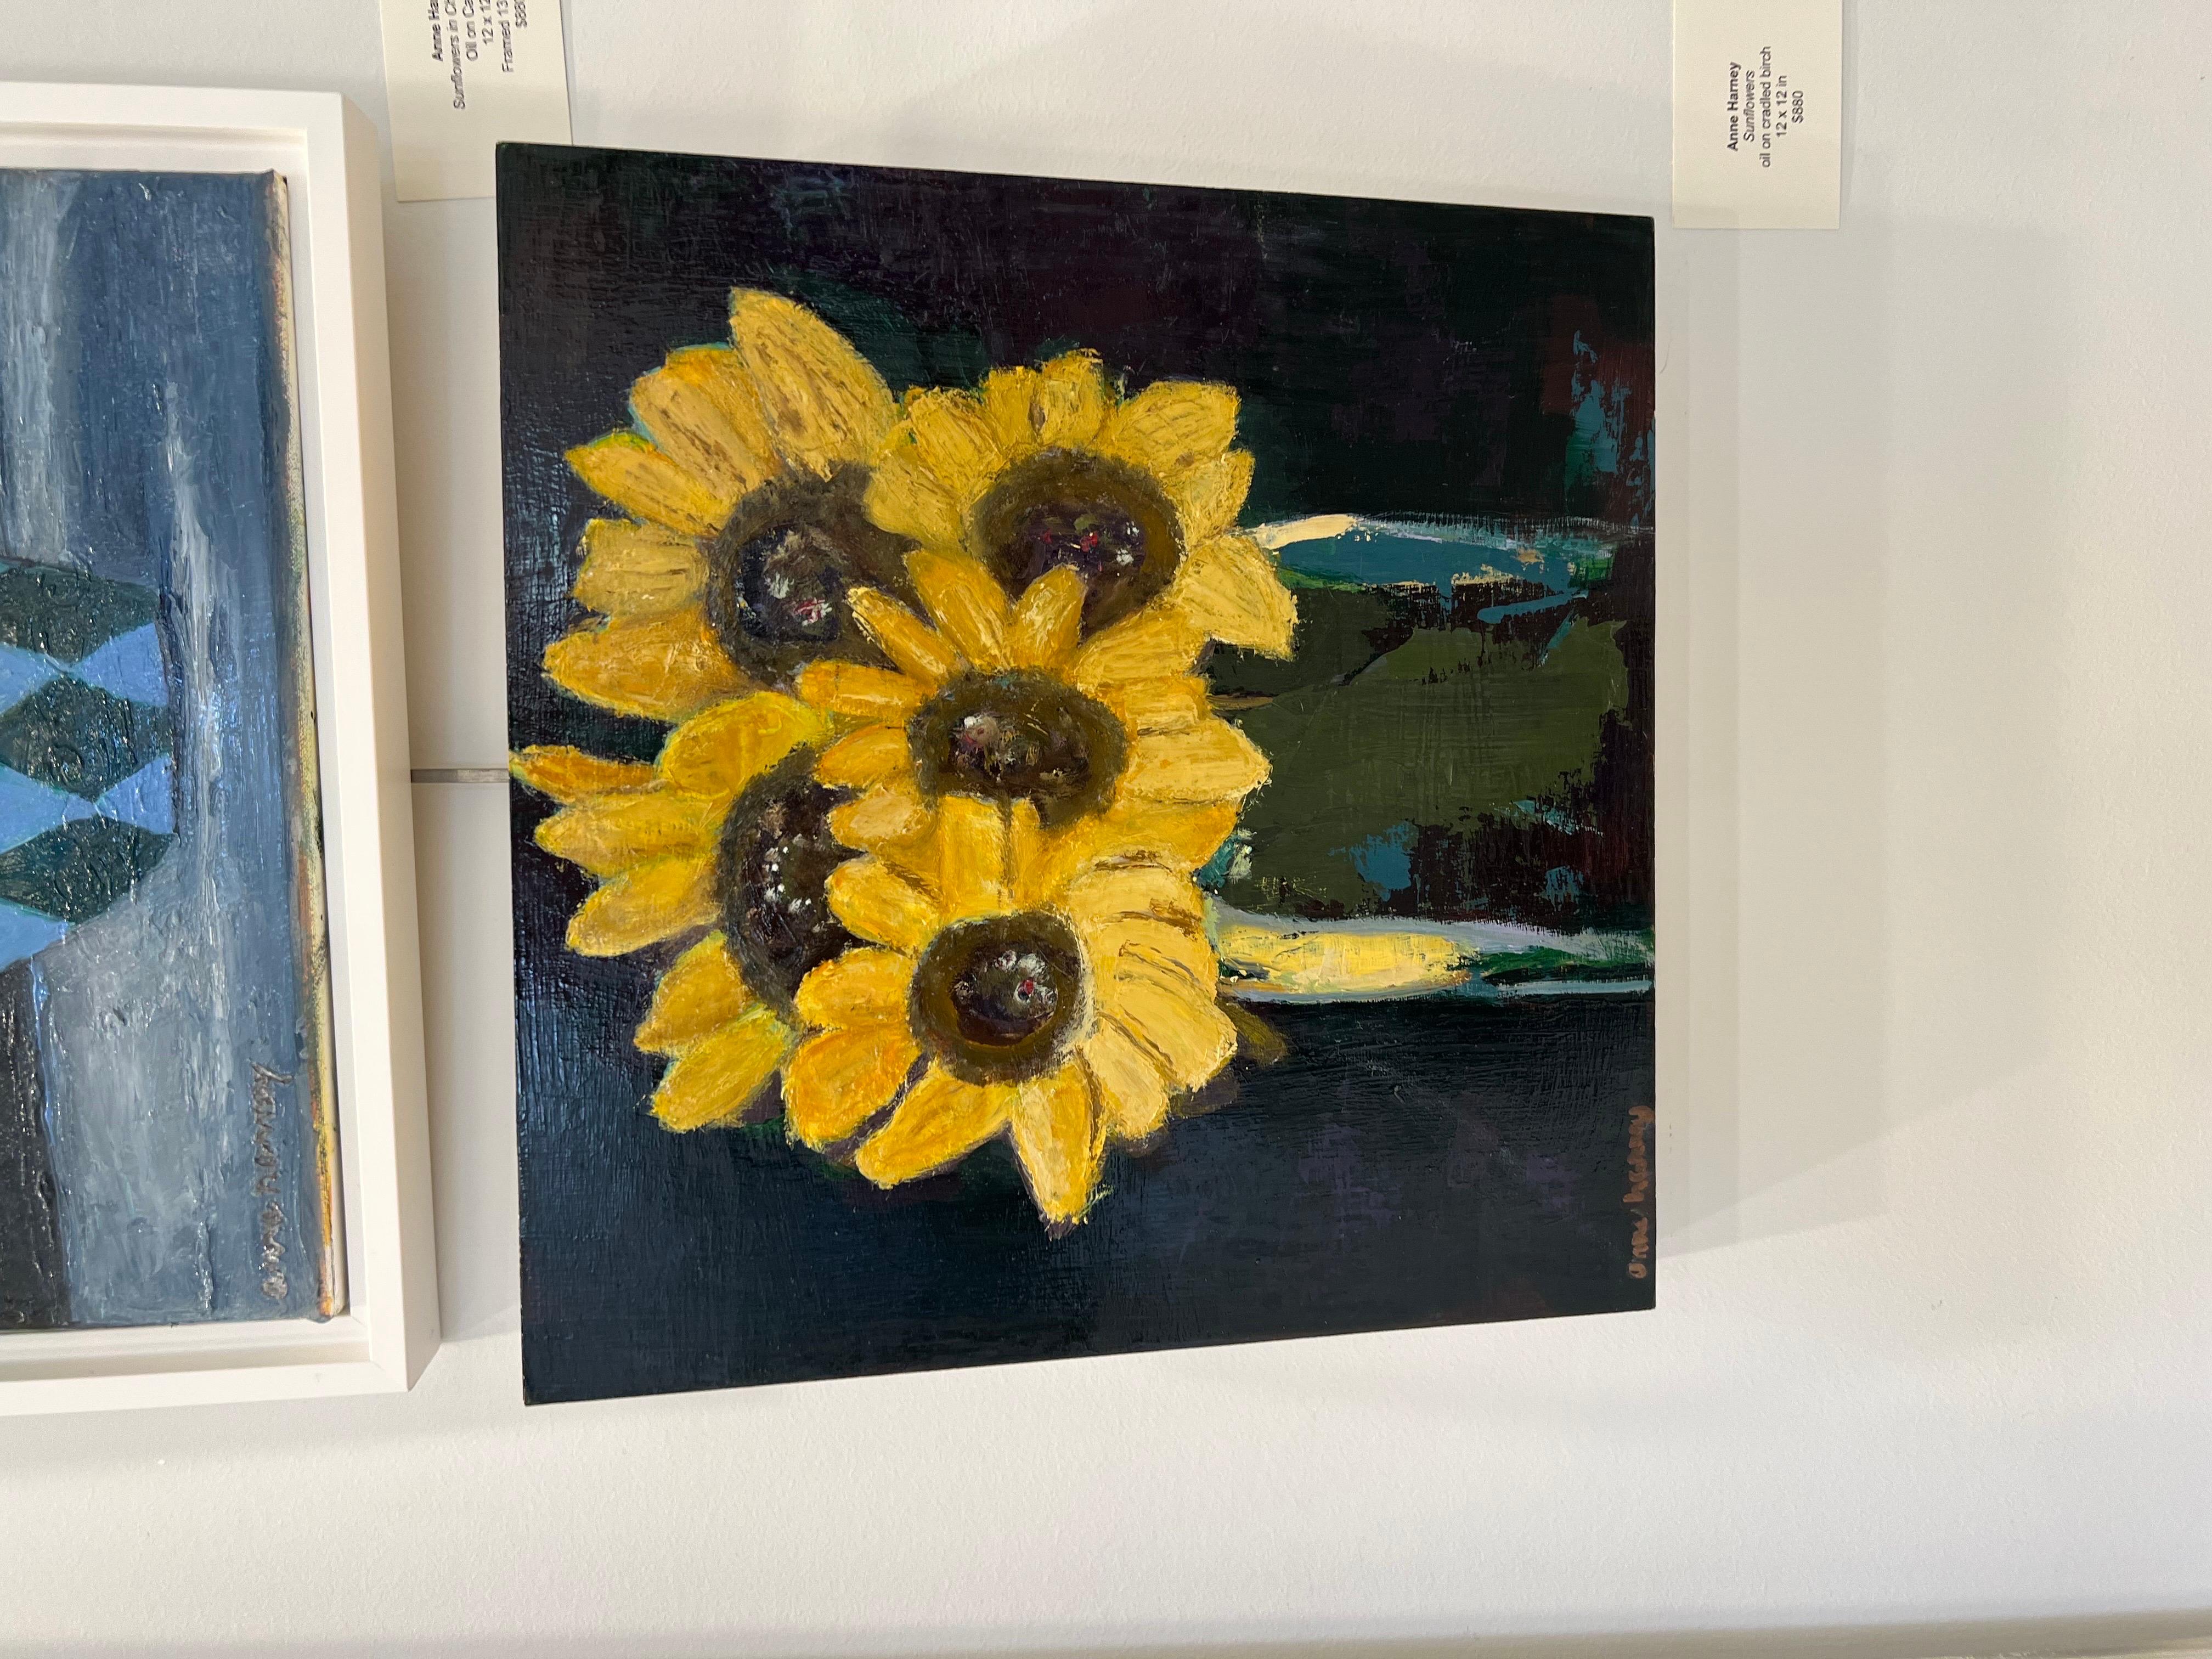 Sunflowers in Clear Vase by Anne Harney, Contemporary Floral Still Life Painting 1